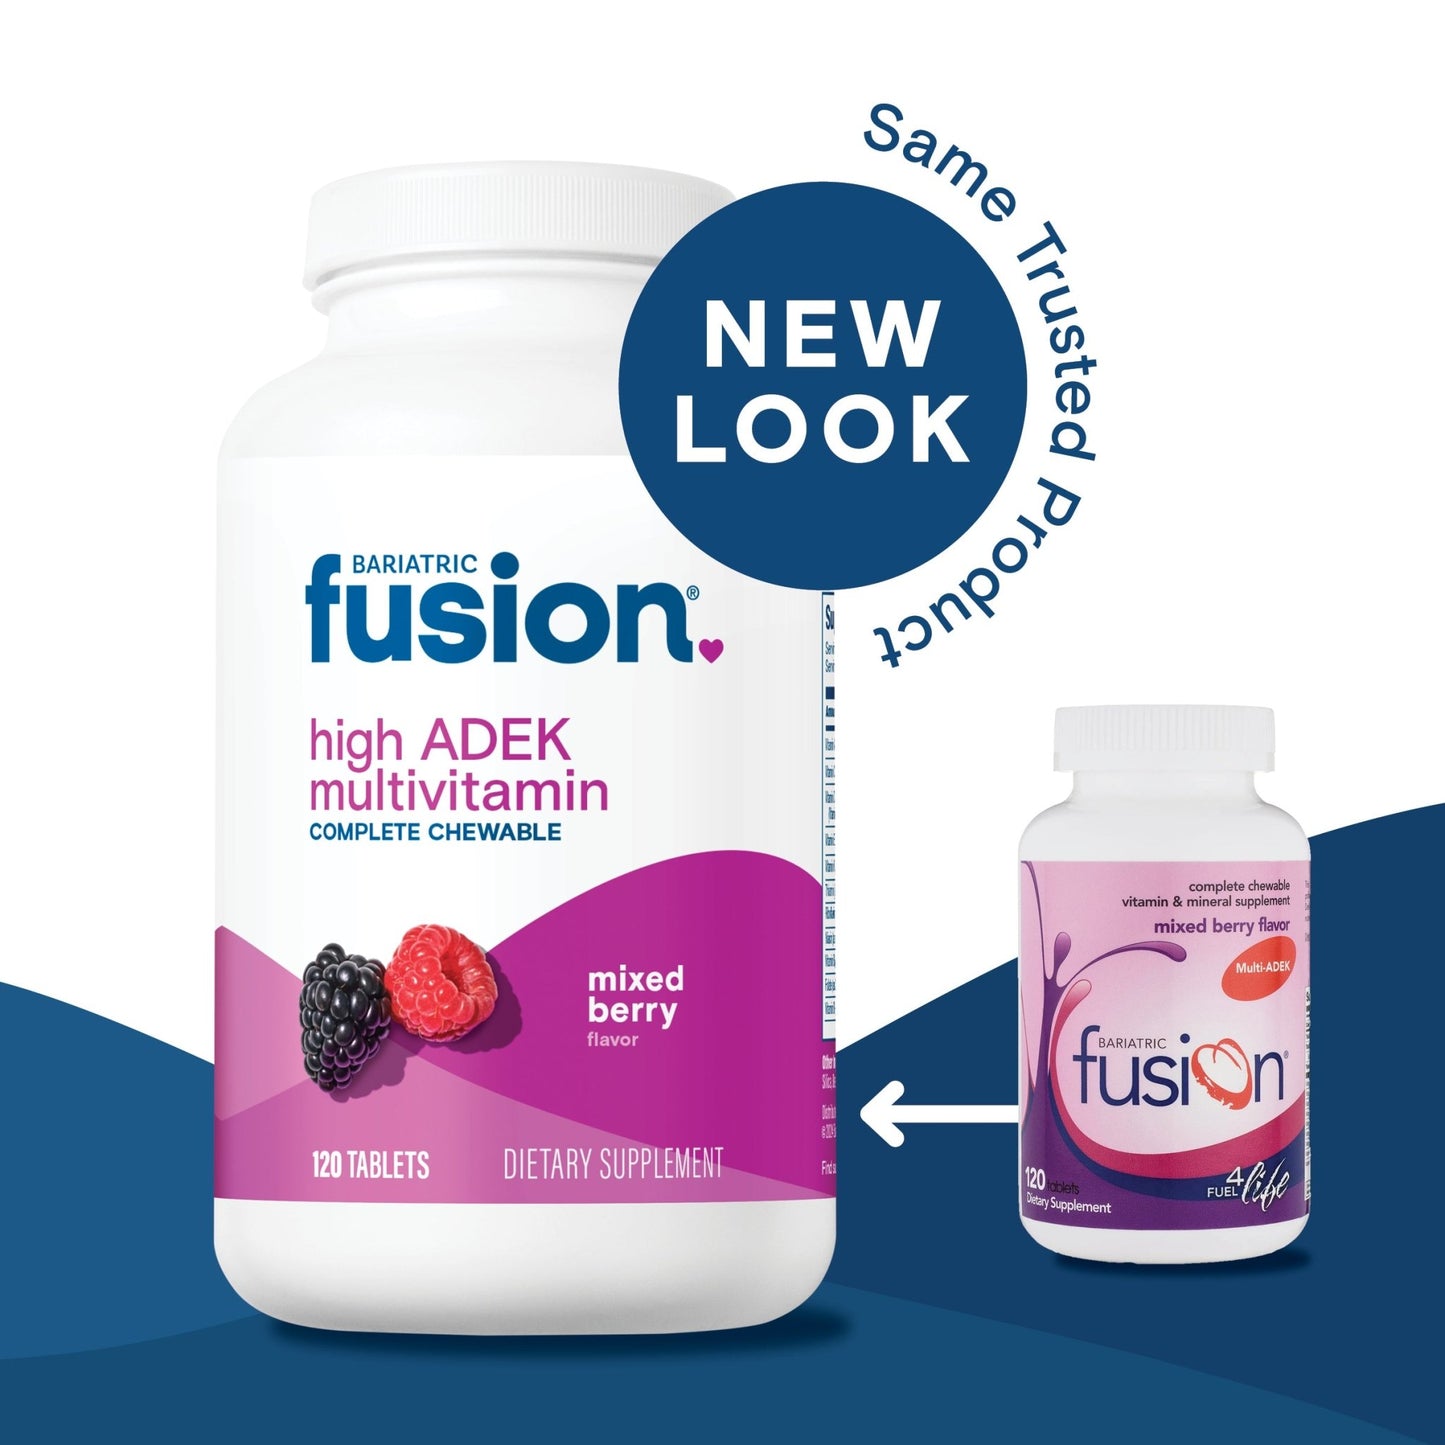 Bariatric Fusion Mixed Berry Complete Chewable Bariatric Multivitamin ADEK new look, same trusted product.